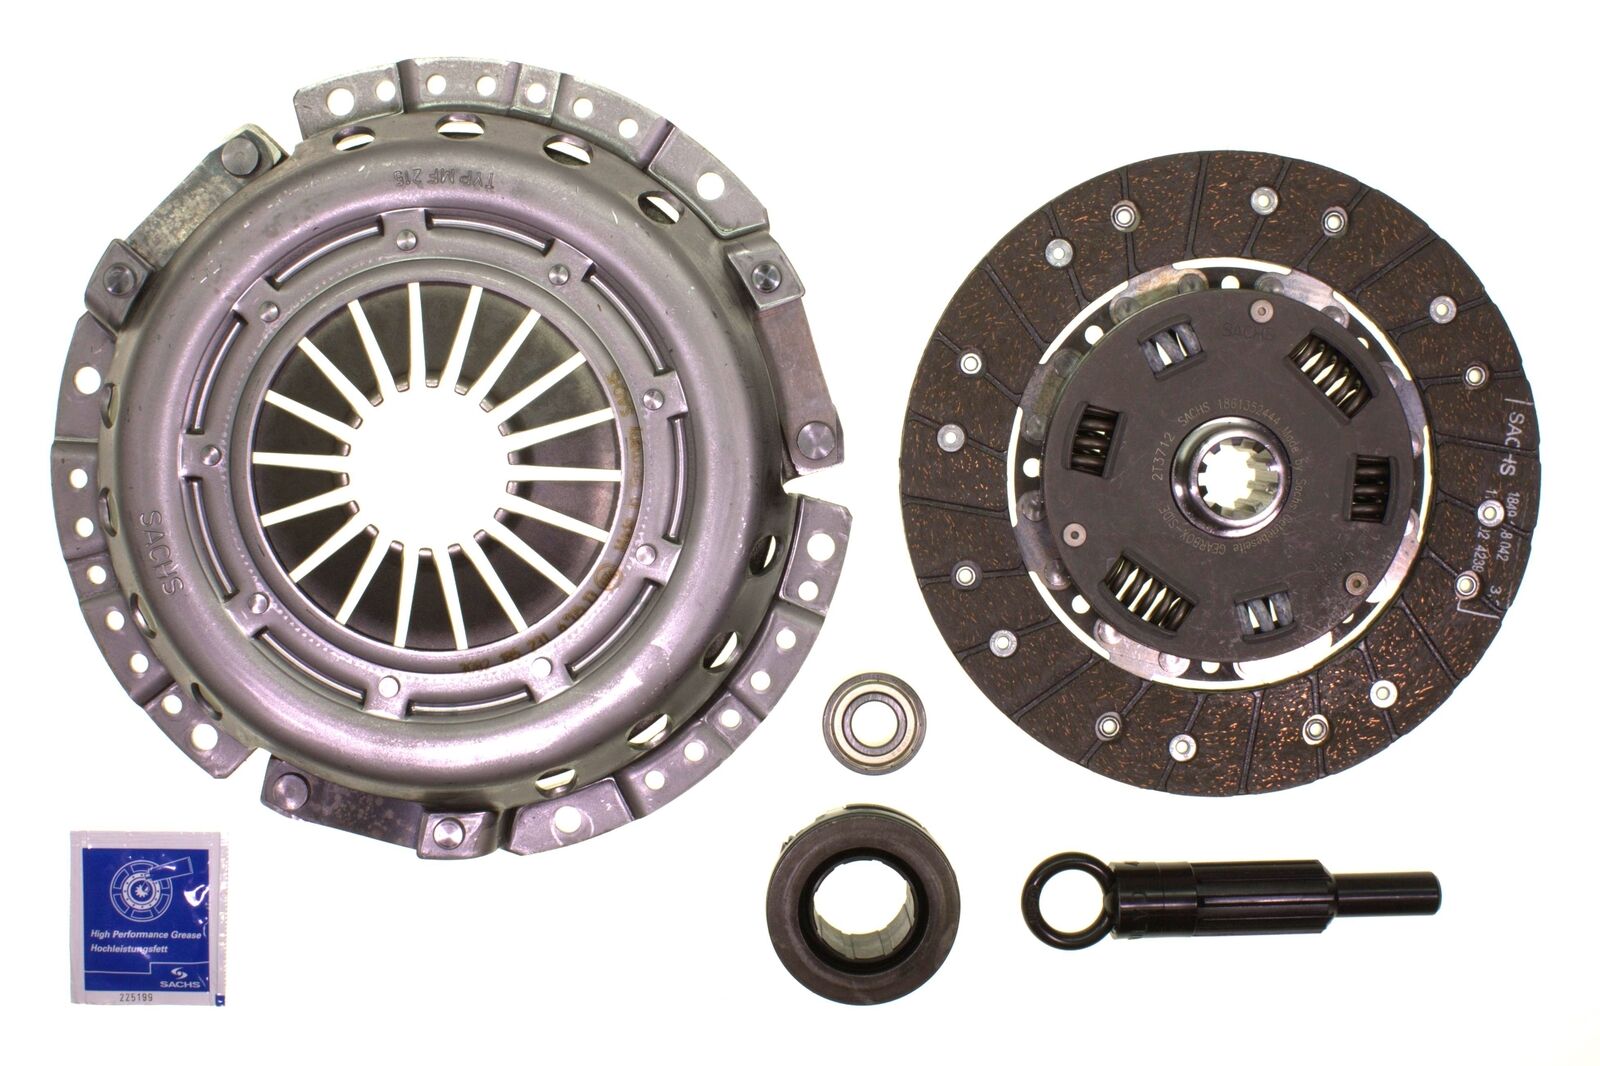  Clutch Kit for Volvo 1800 1962 - 1973 & Others SACHSKF242-01